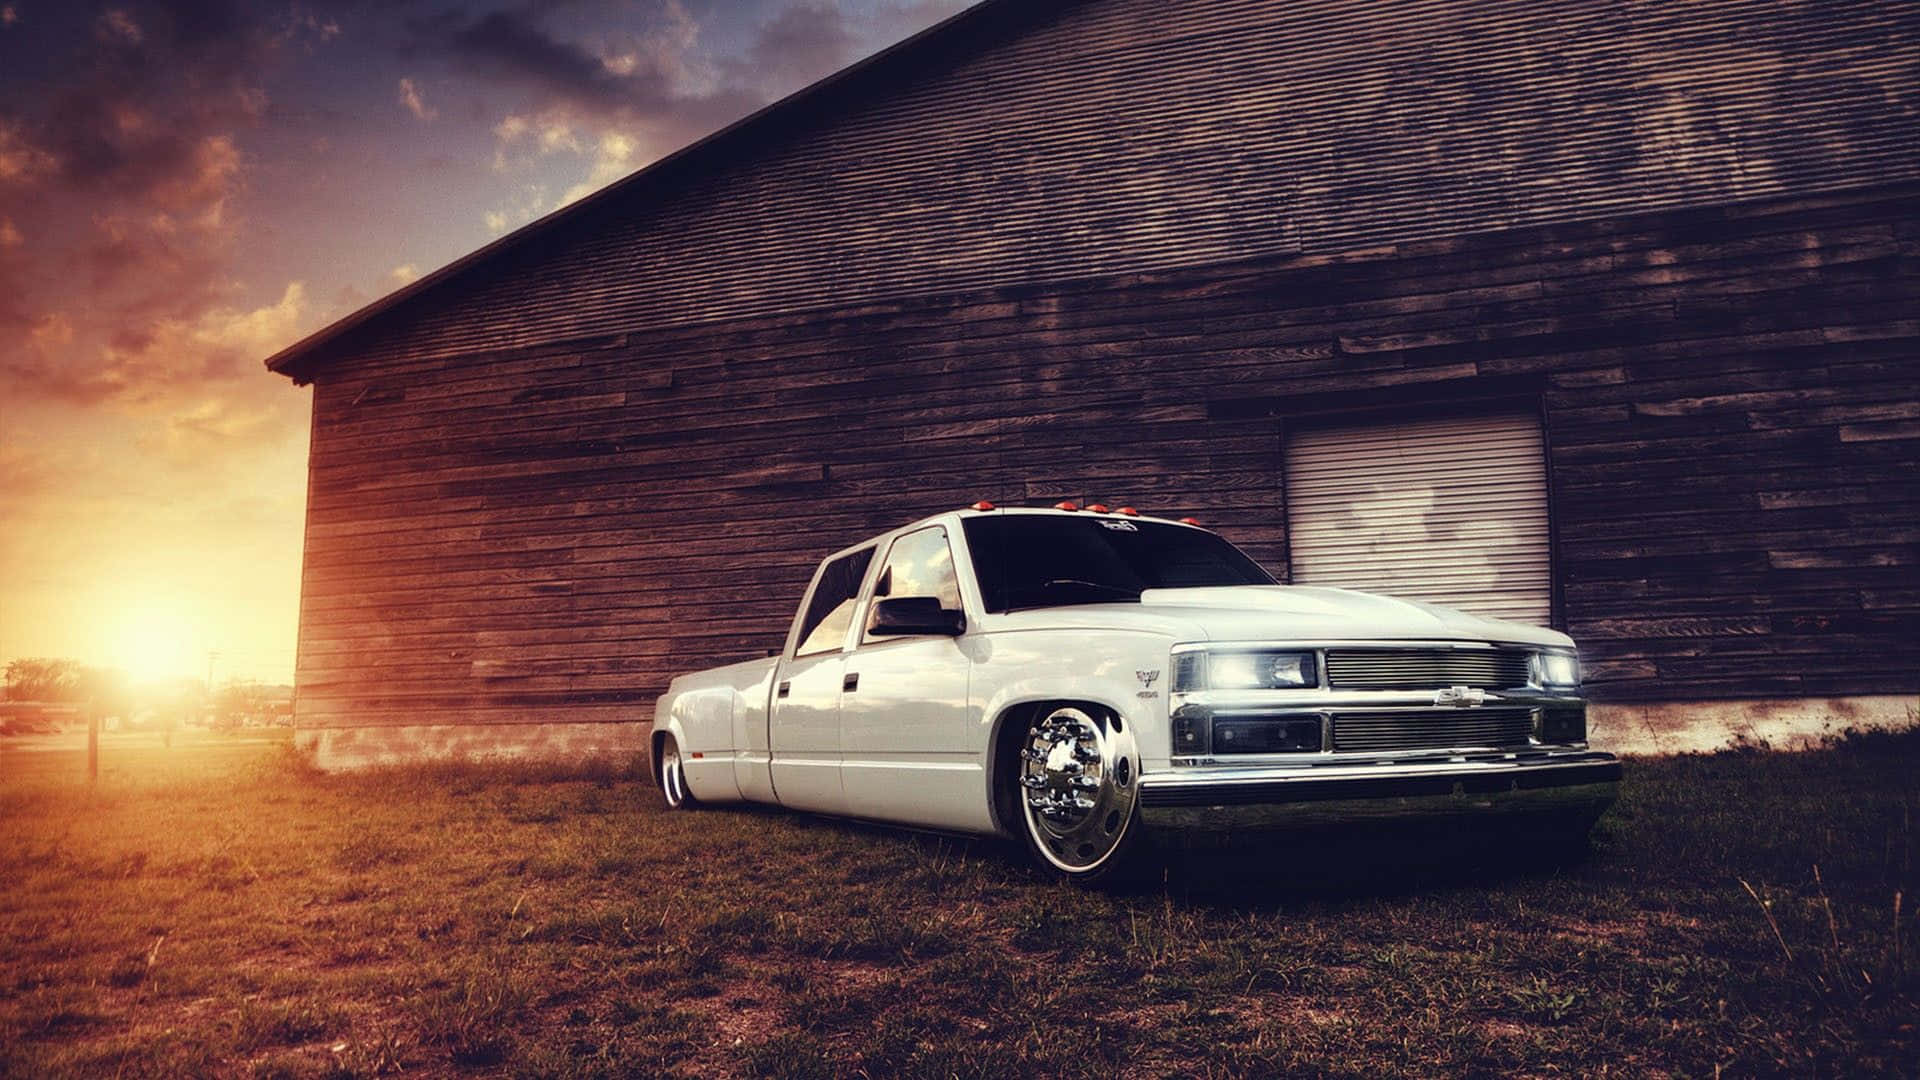 A White Truck Parked In Front Of A Barn